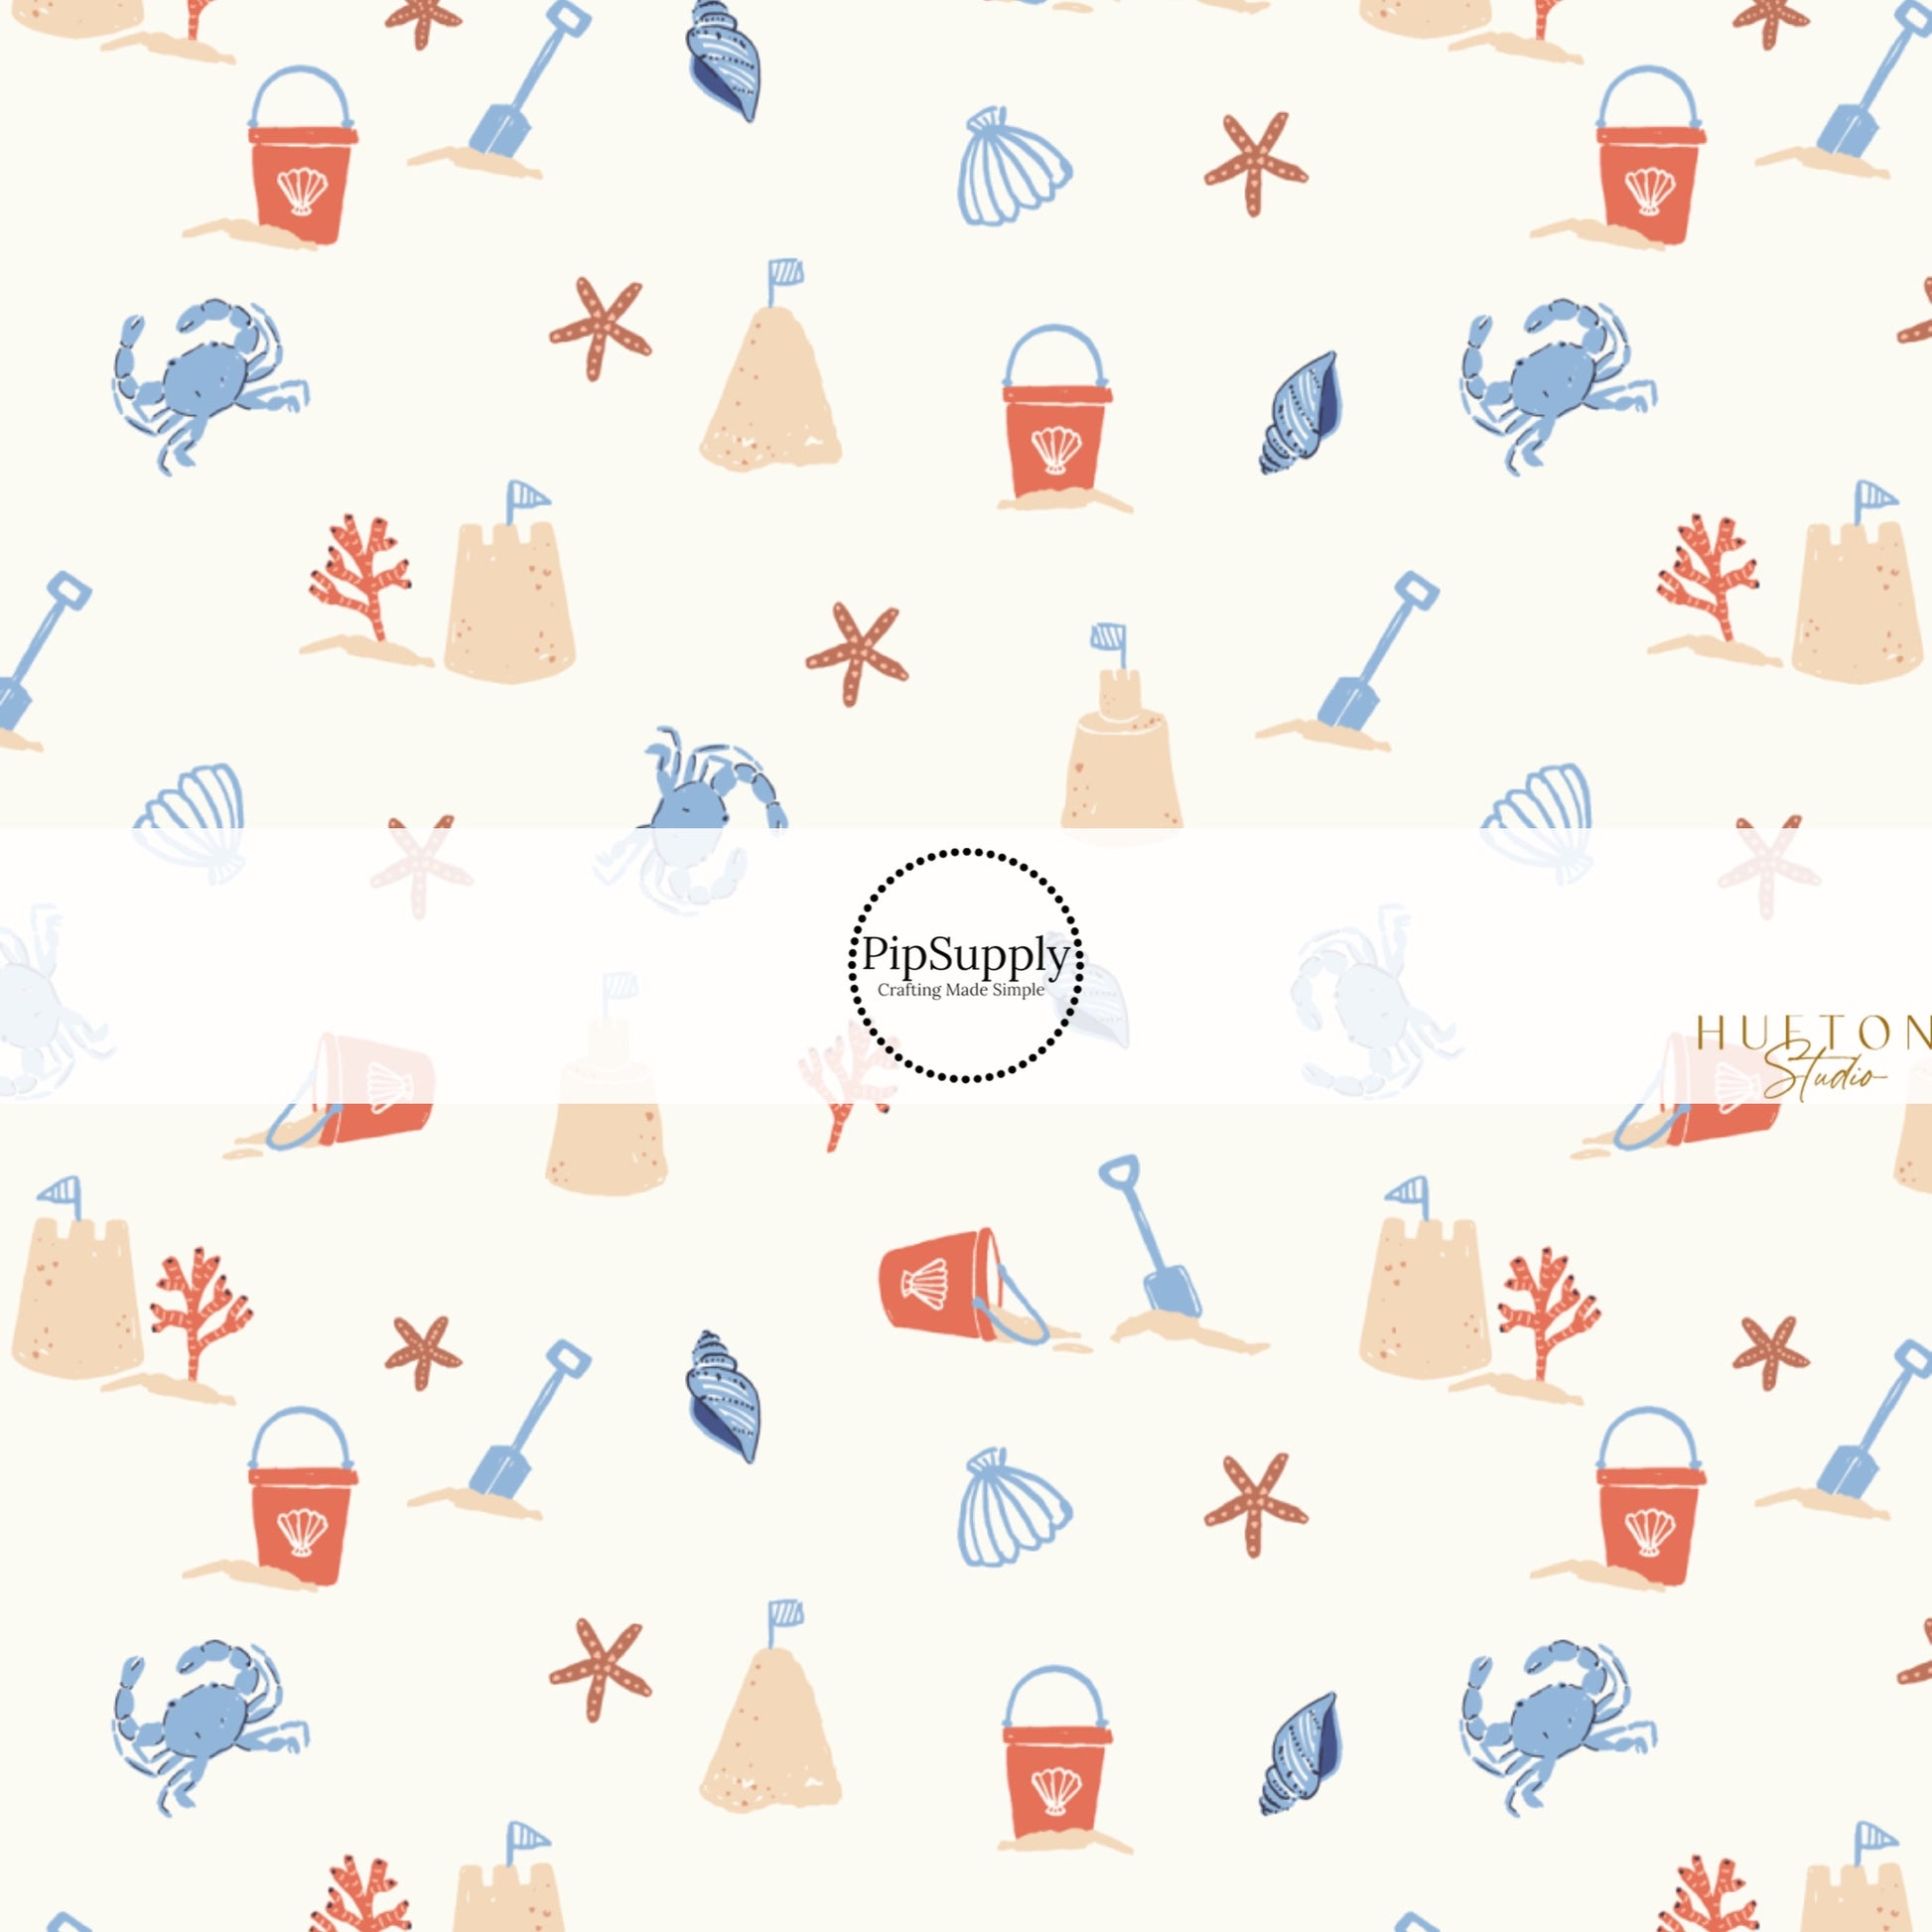 This summer fabric by the yard features sand castles and crabs. This fun themed fabric can be used for all your sewing and crafting needs!